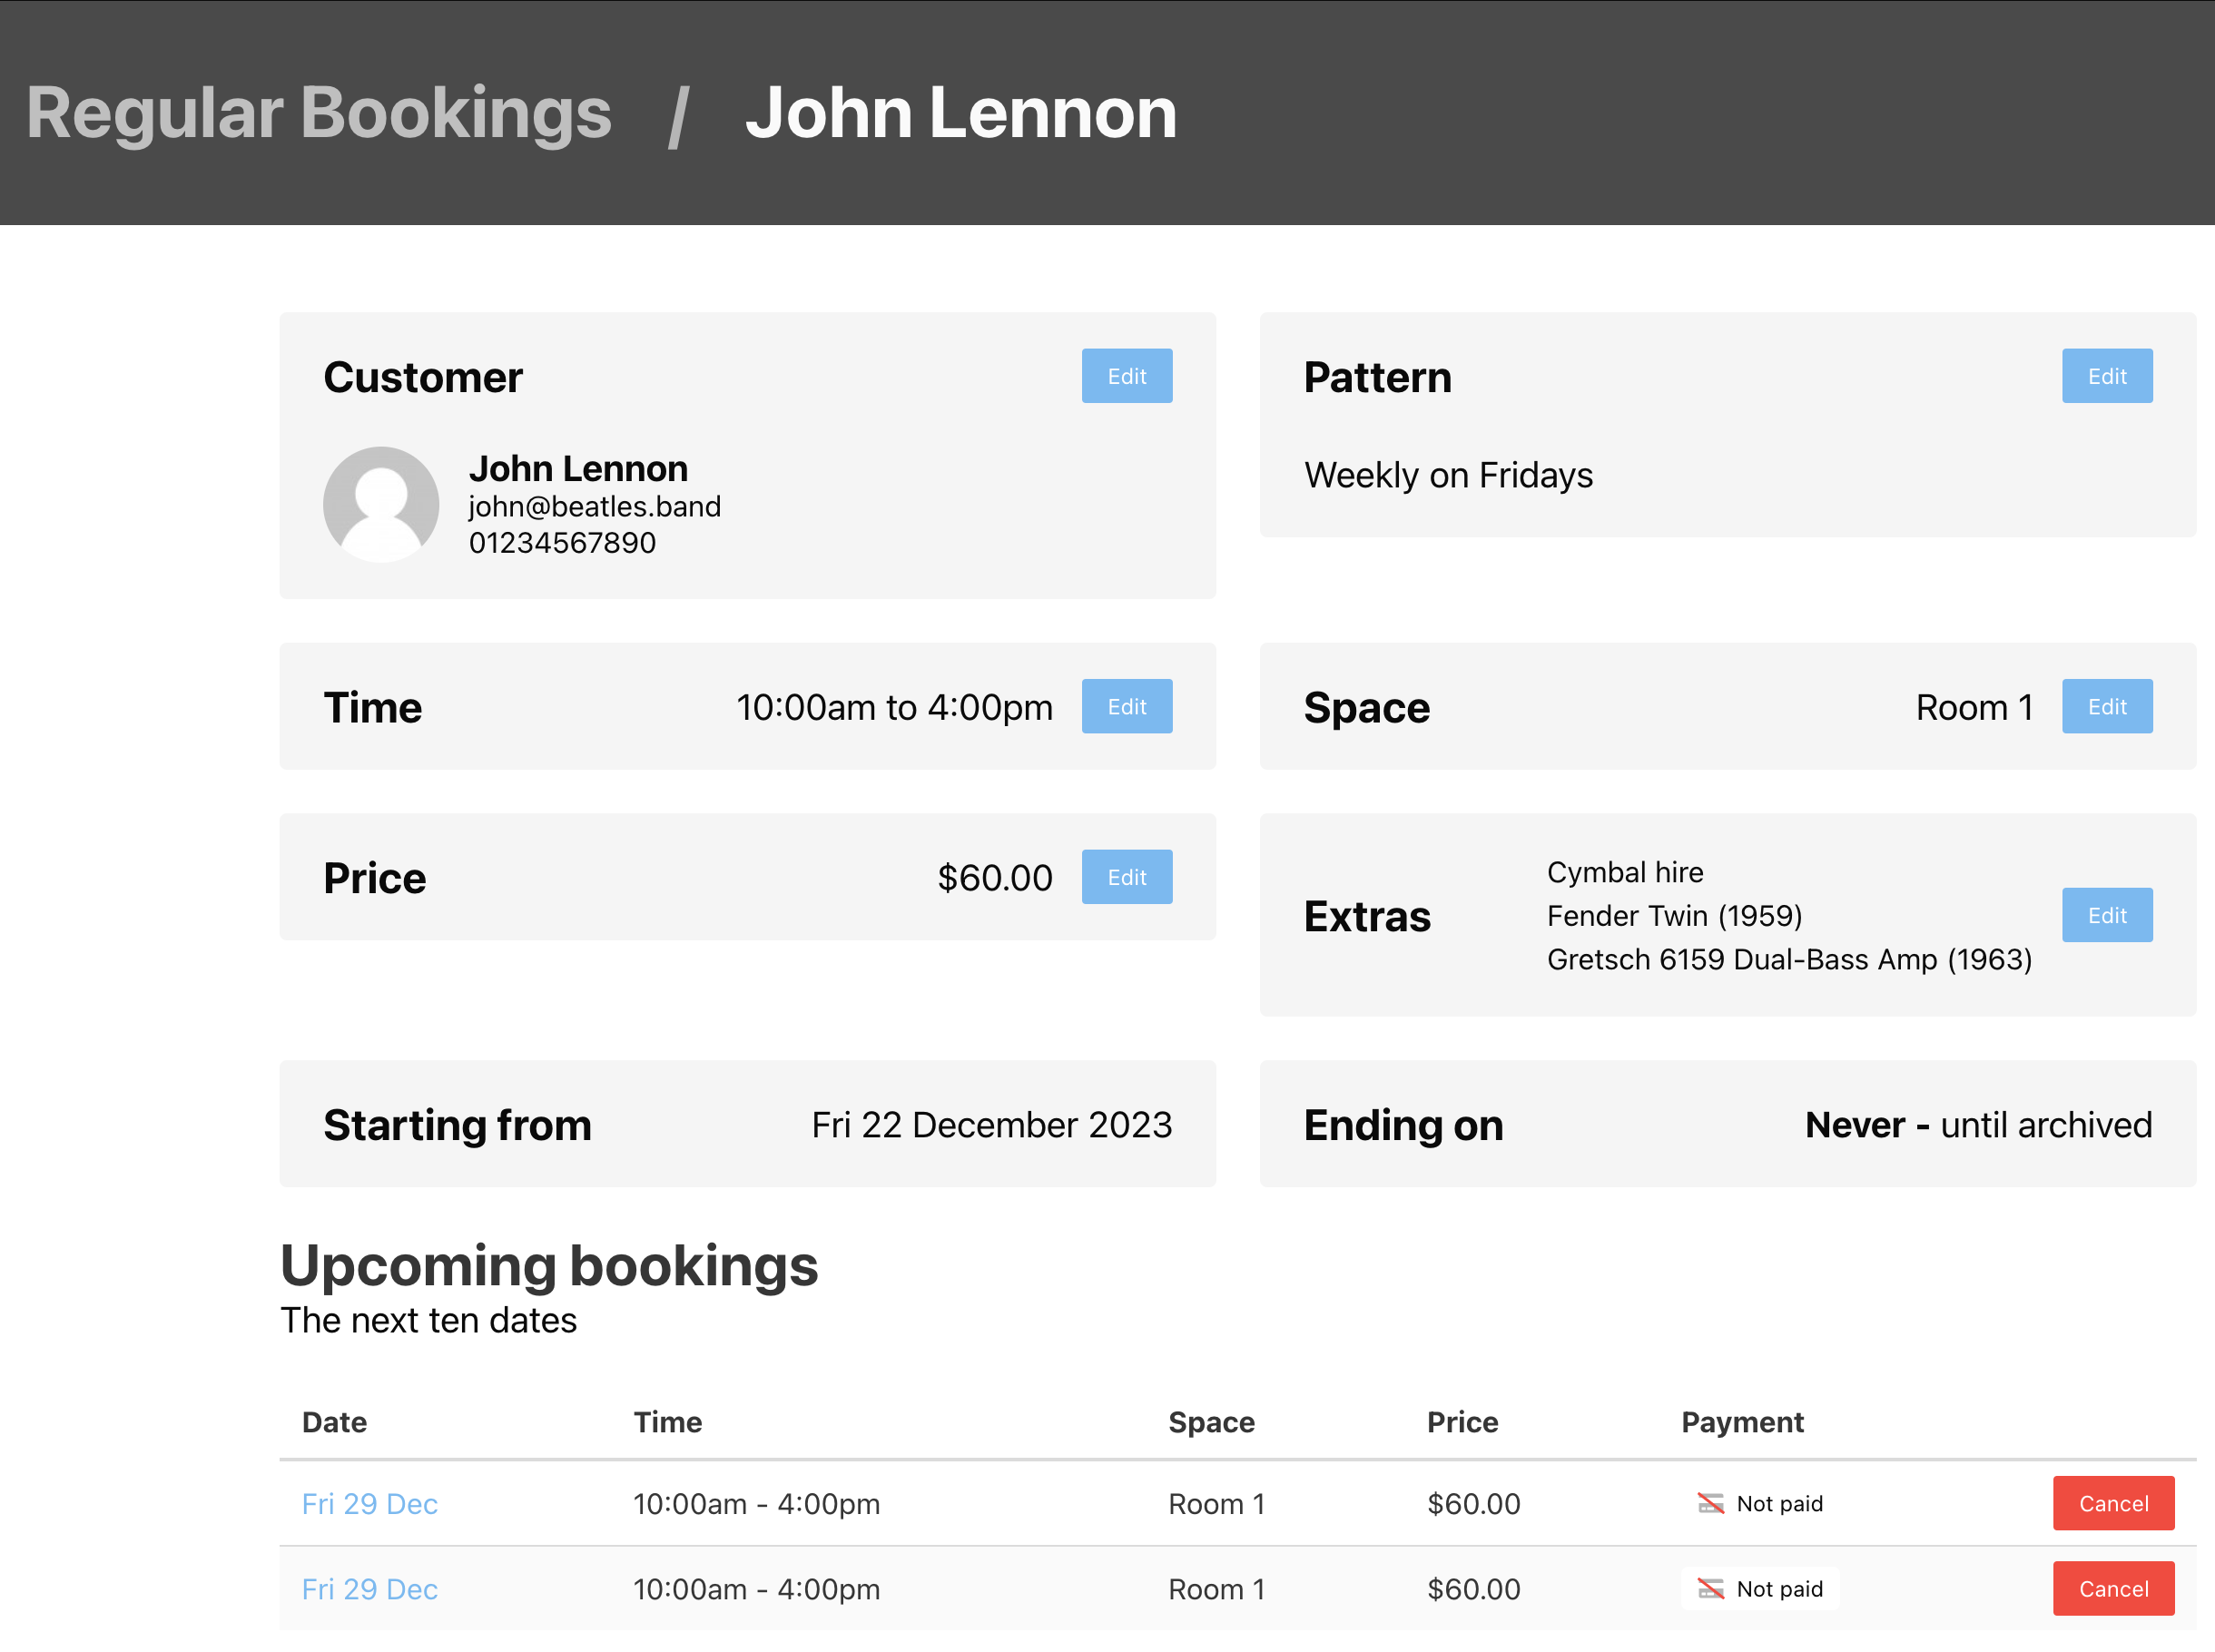 A regular booking for John Lennon - a booking at the same time for a repeating pattern (every week for example)